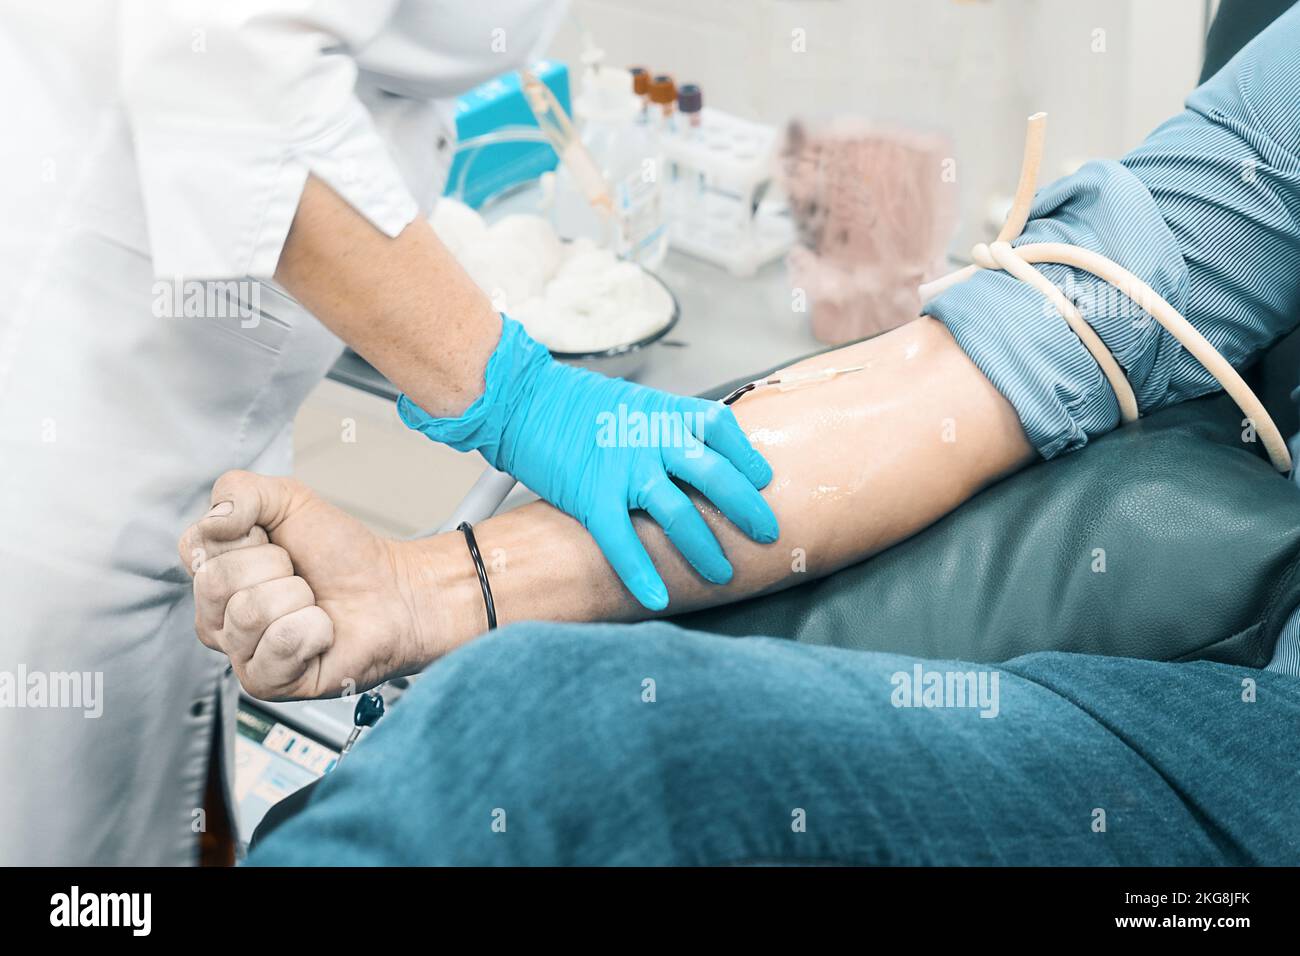 Medical worker in gloves and gown takes blood from man's vein. Donor sits in chair and donates blood. Background. Authentic scene from medical clinic. Topic of donation.. Stock Photo